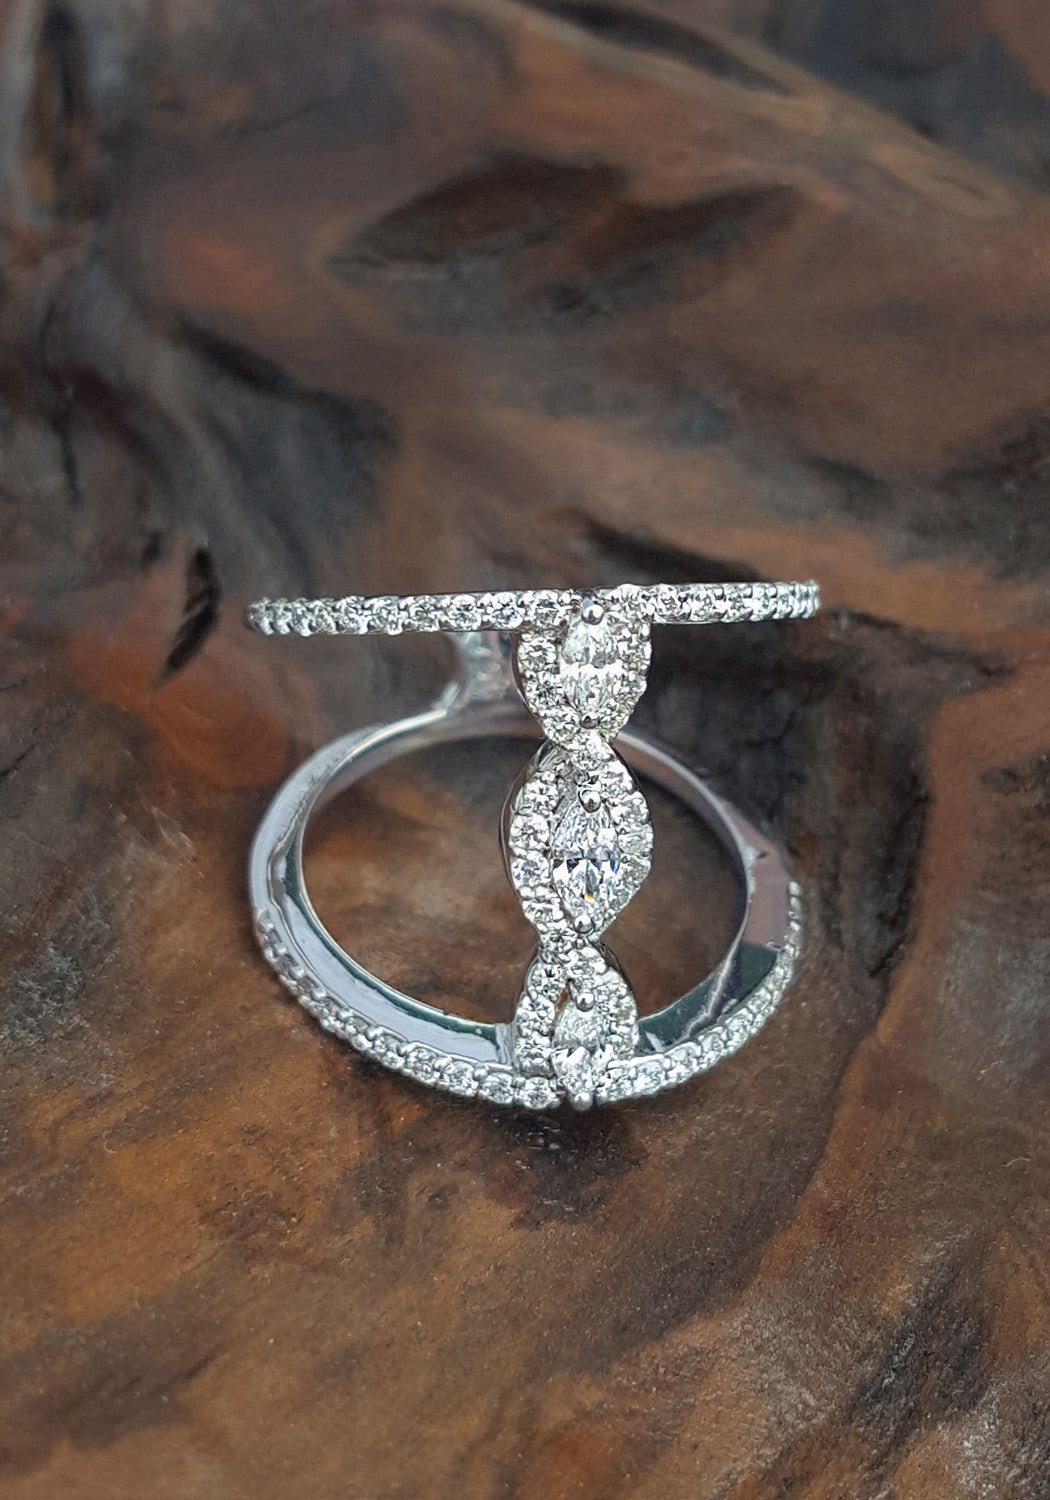 Norman Covan Diamond Twist Ring at Oster Jewelers